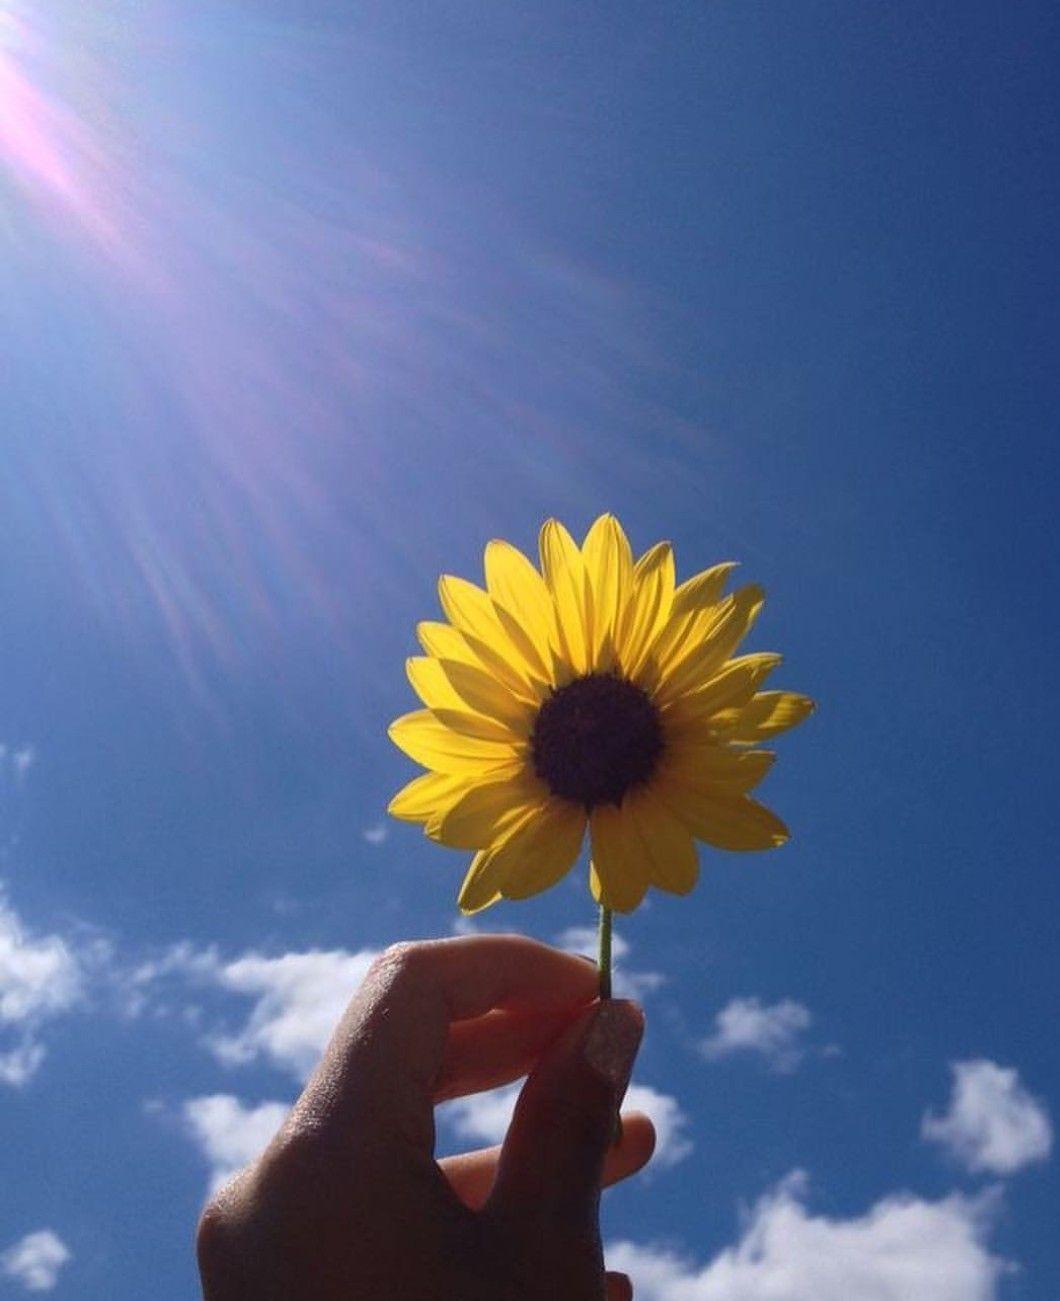 A person holding up the sunflower in front of them - Sunlight